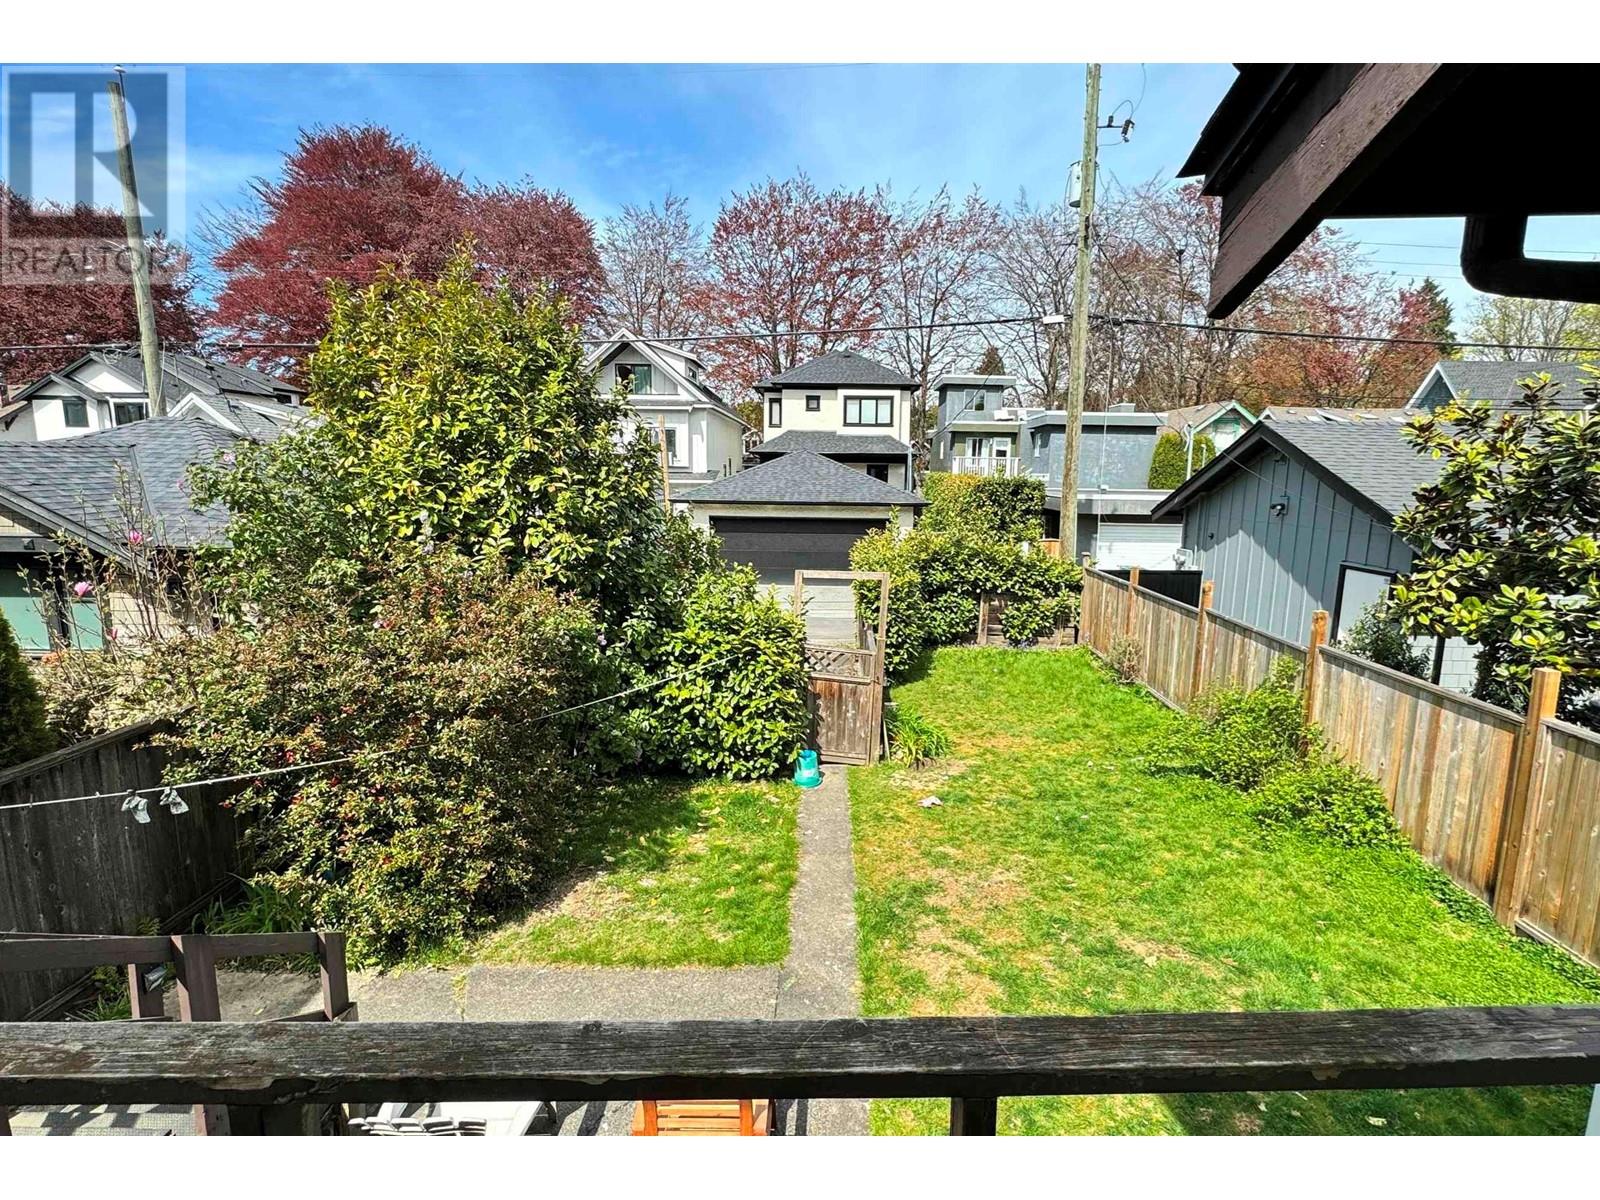 Listing Picture 7 of 8 : 2735 W 14TH AVENUE, Vancouver / 溫哥華 - 魯藝地產 Yvonne Lu Group - MLS Medallion Club Member